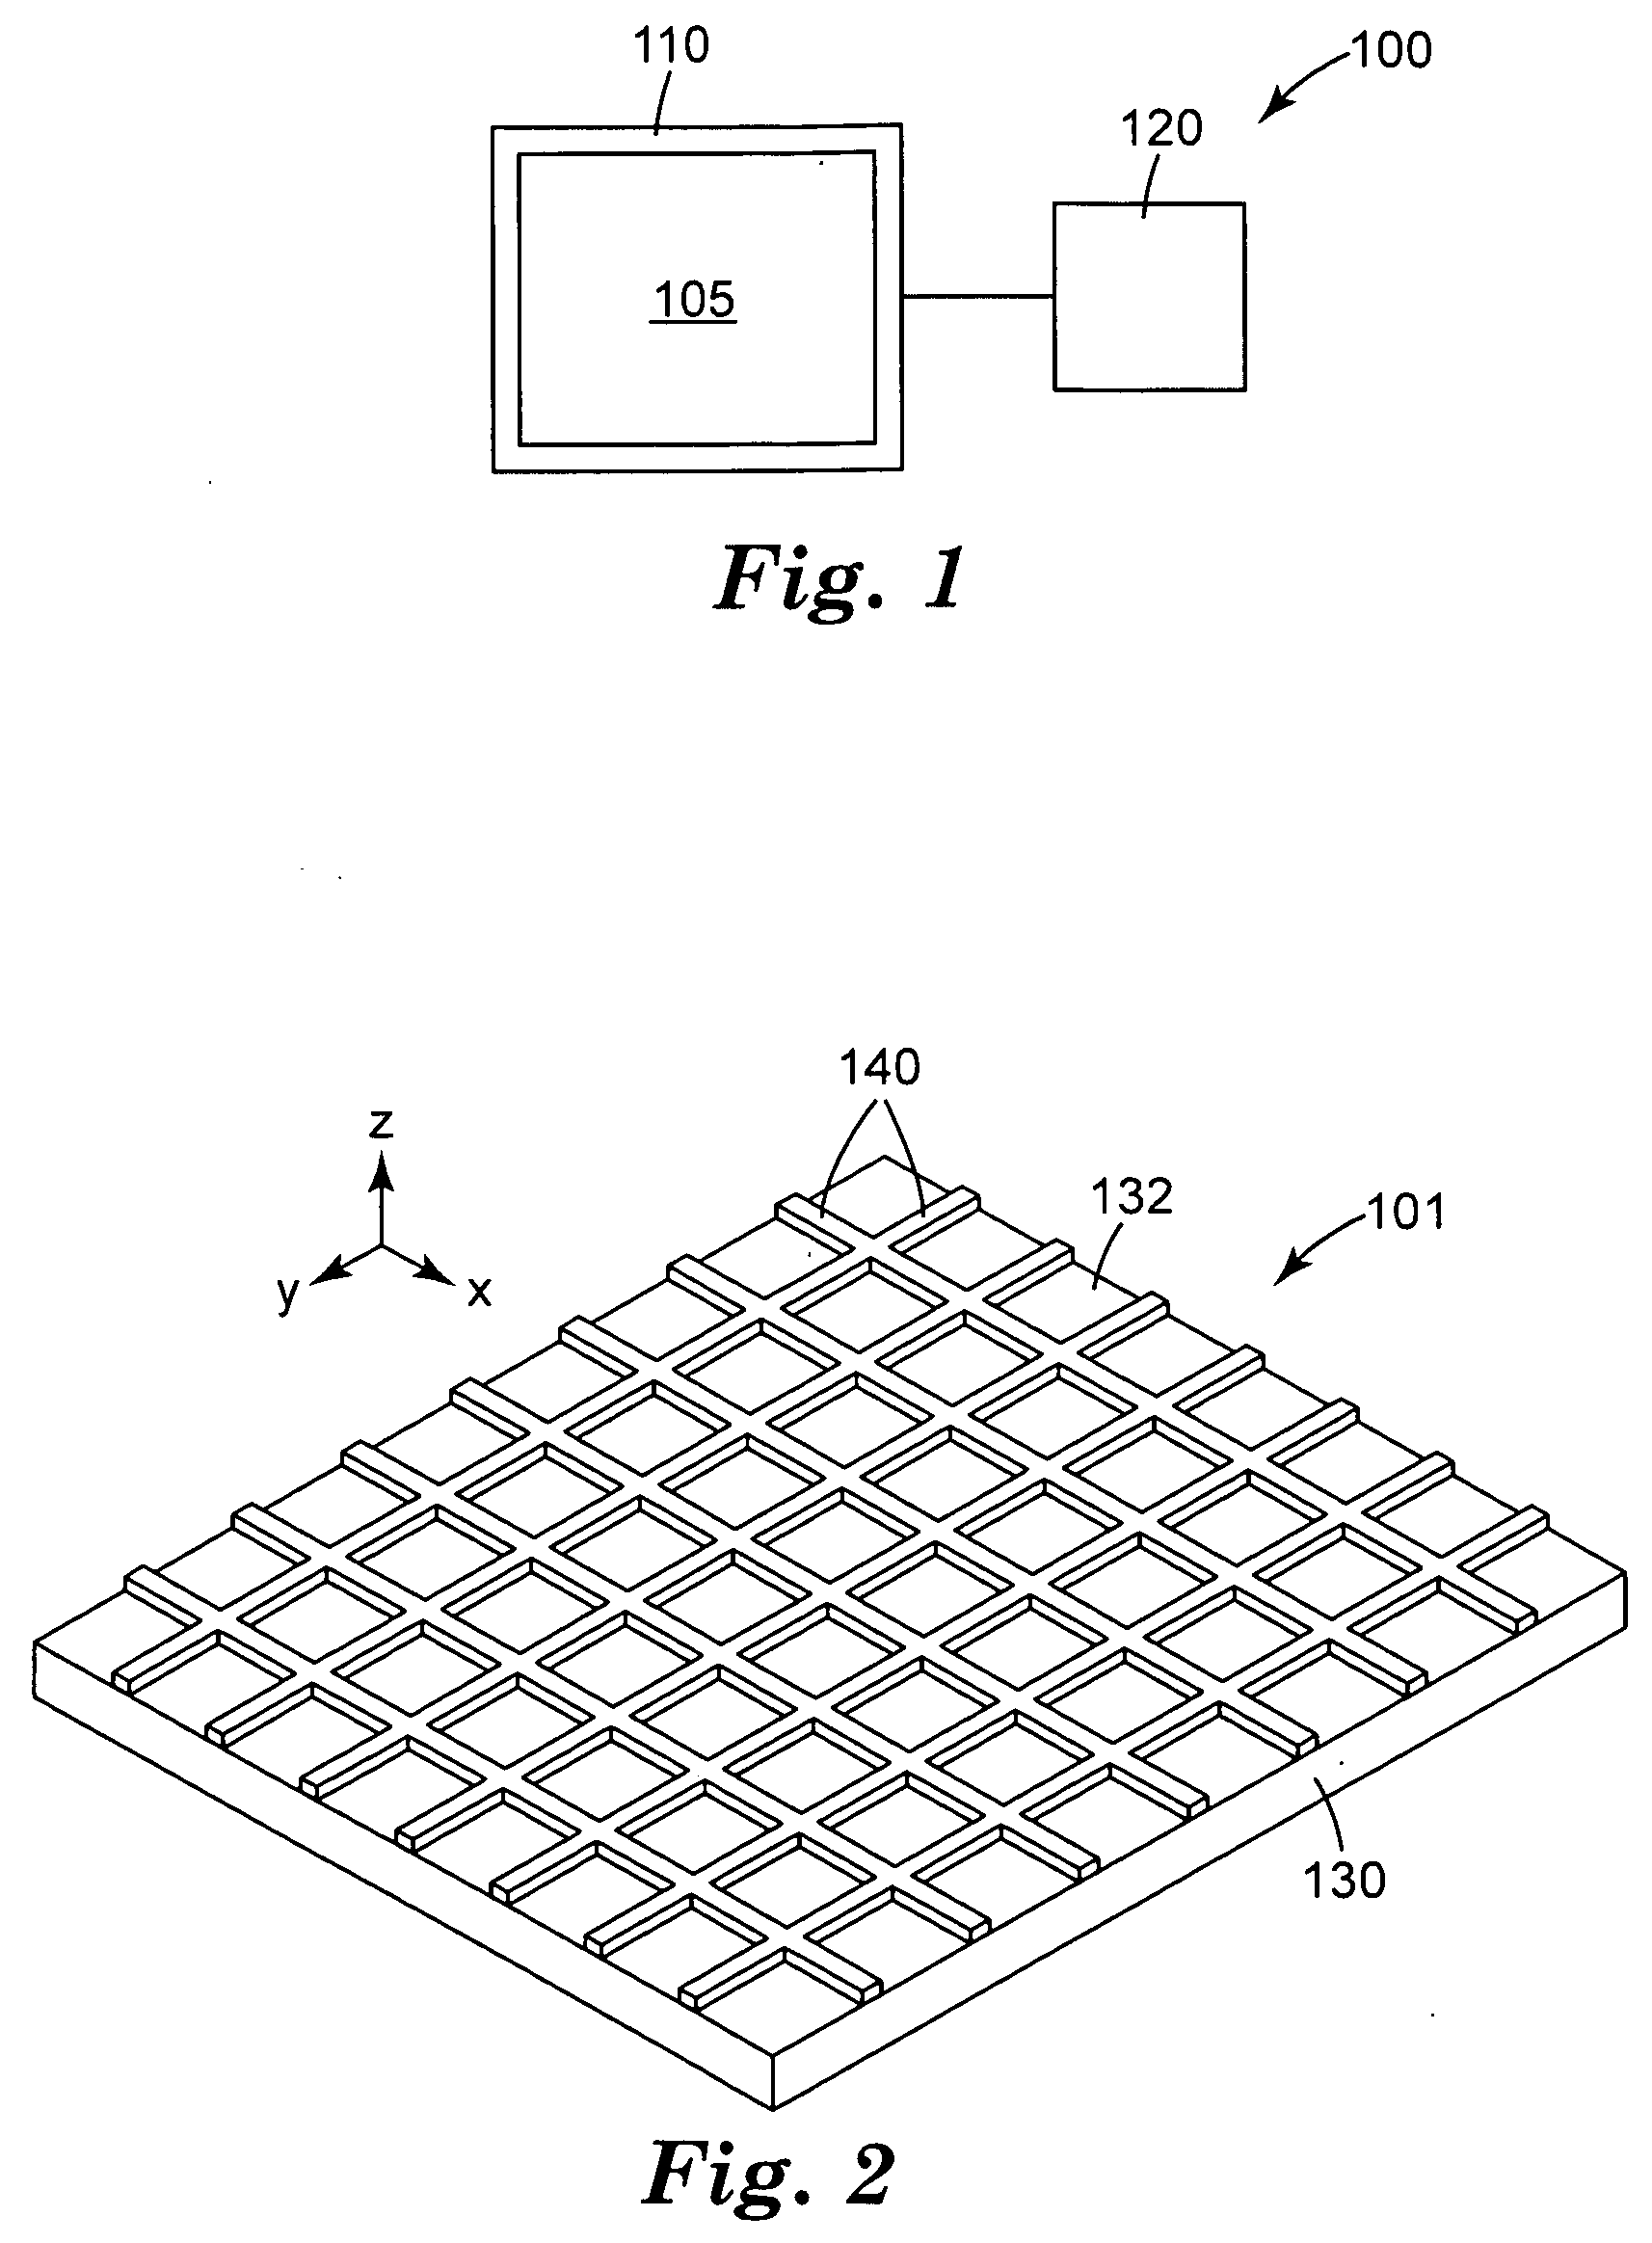 Touch screen sensor with low visibility conductors